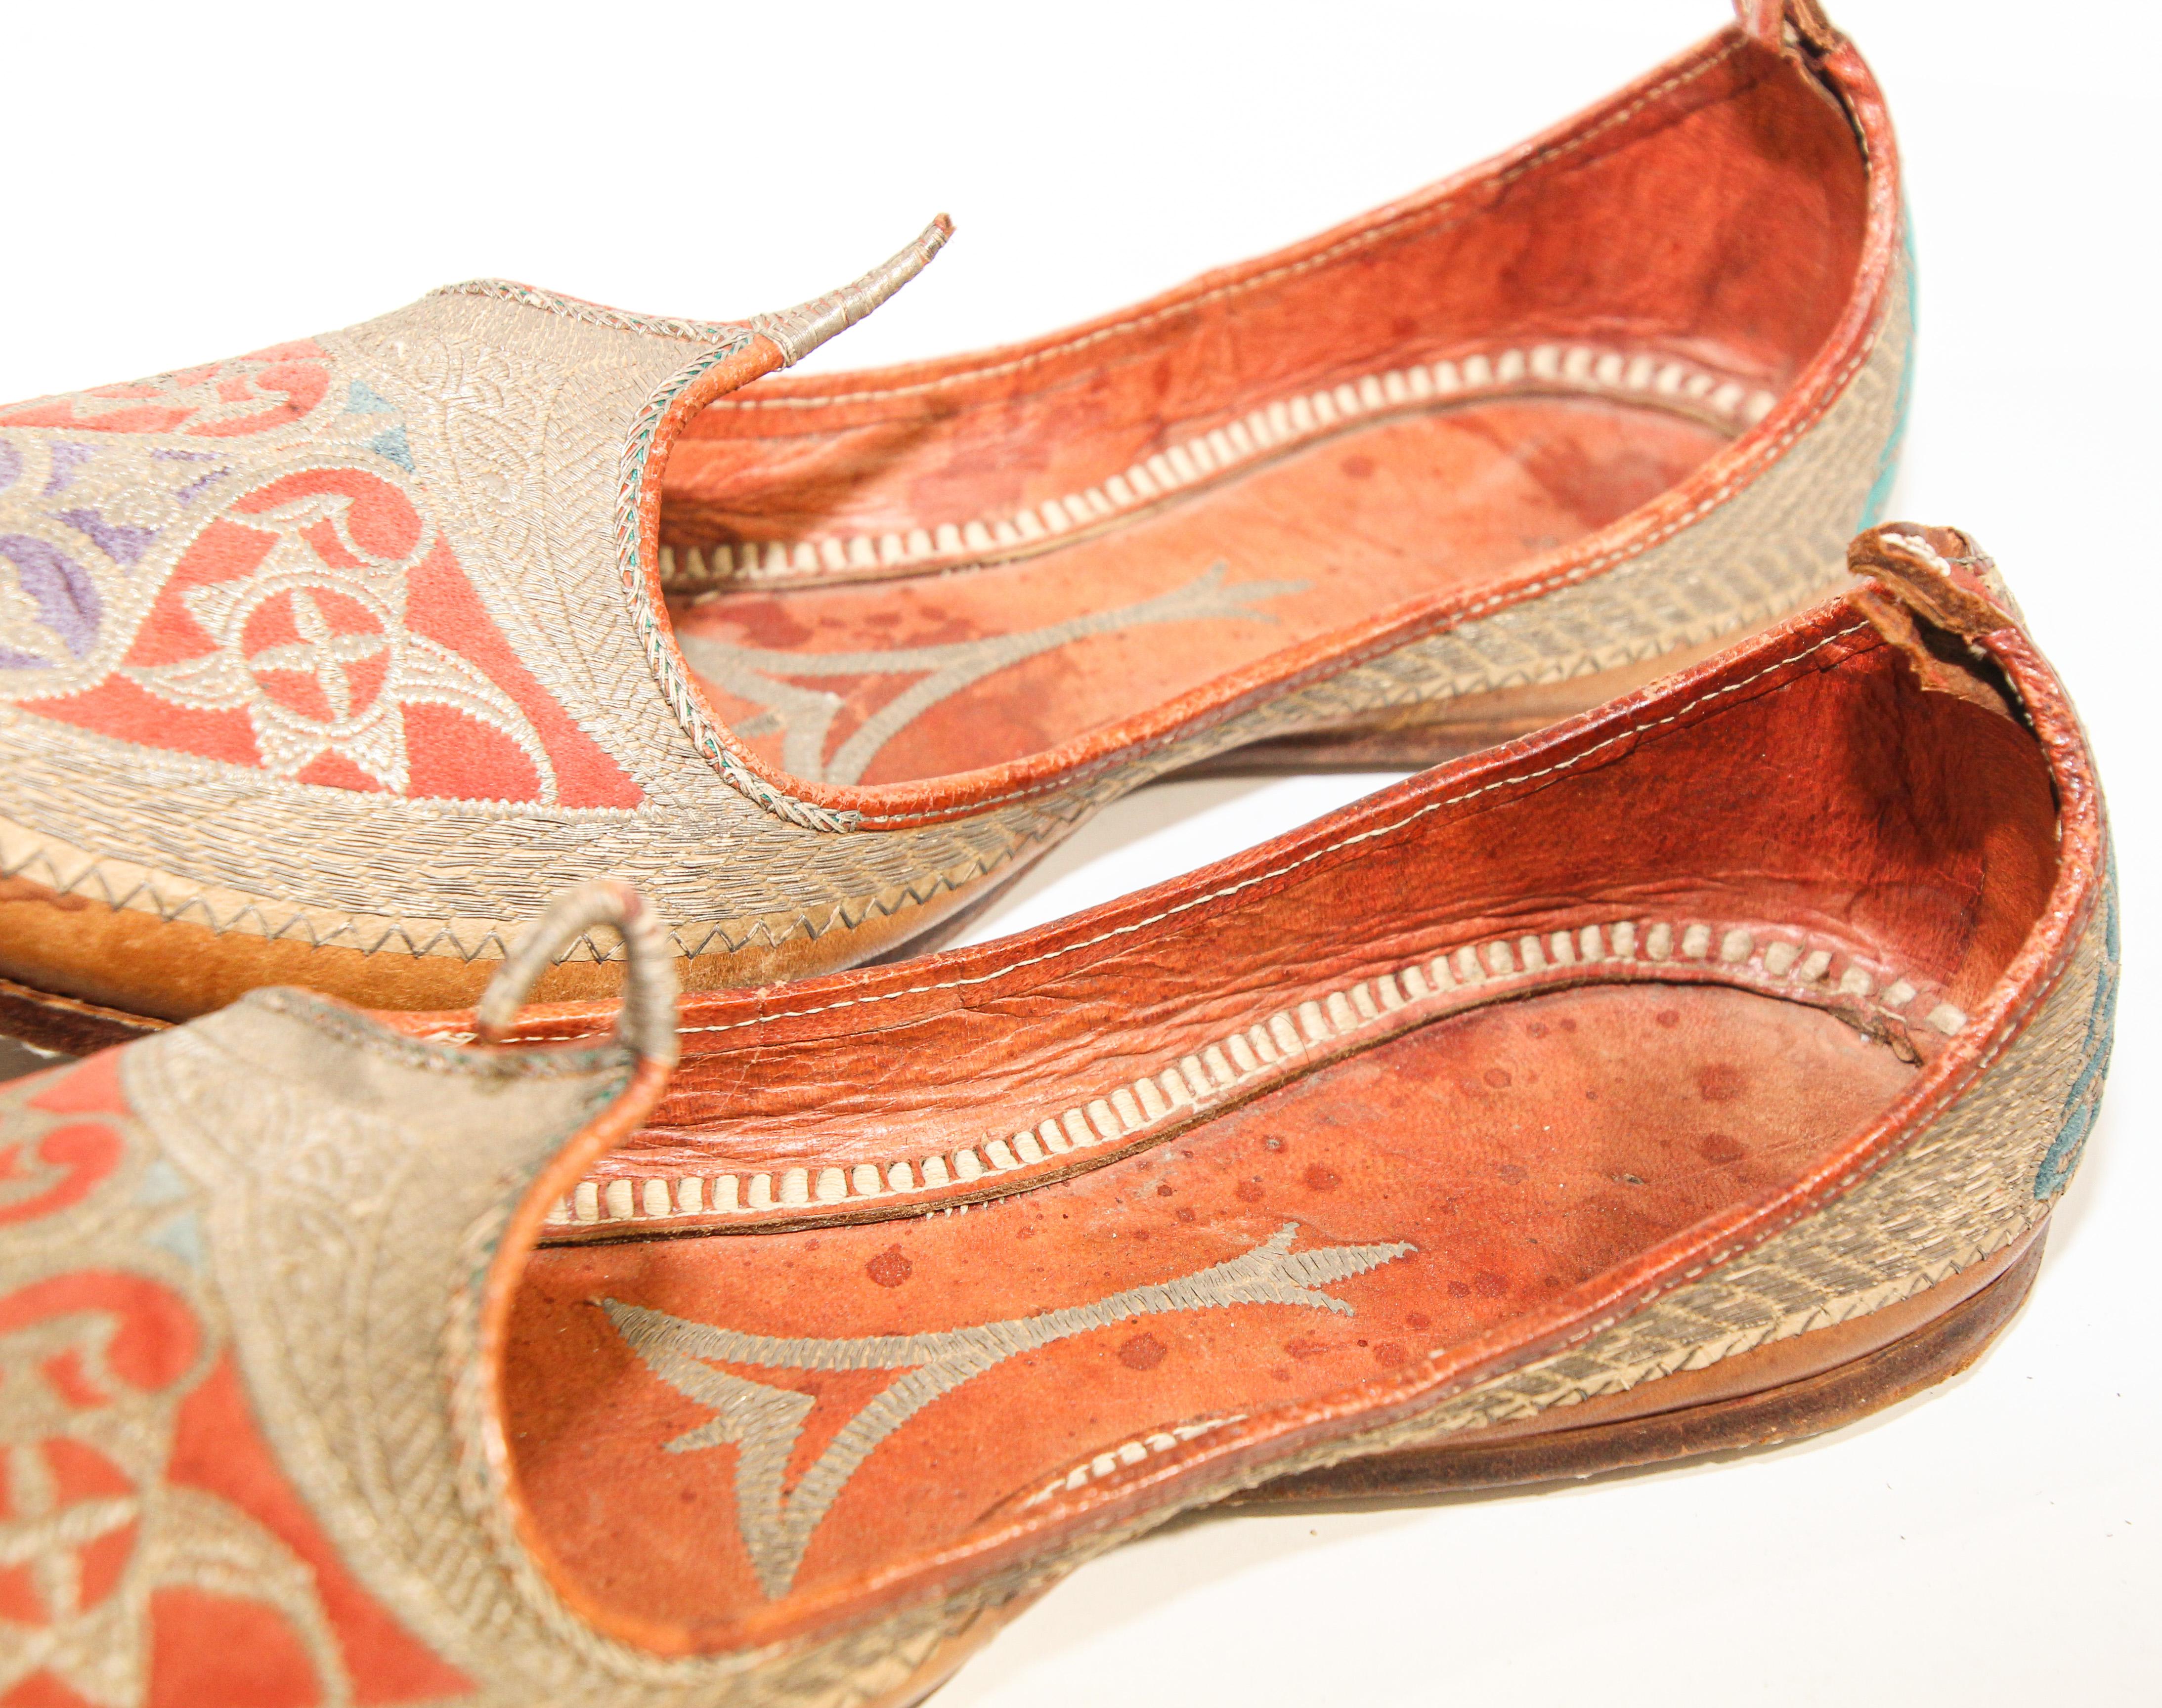 Antique Leather Mughal Shoes with Gold Embroidered For Sale 7